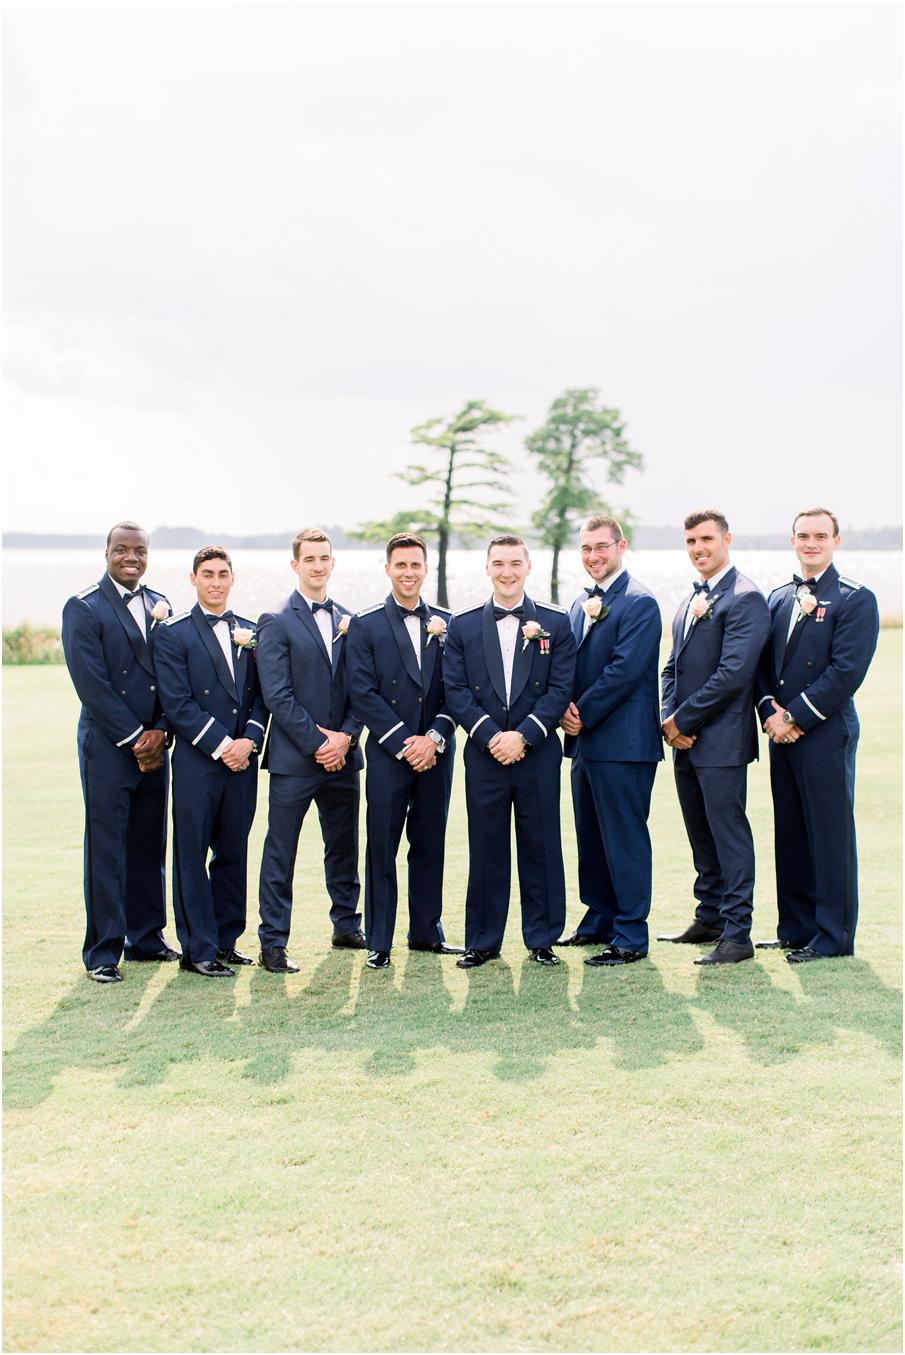 Groomsmen in military uniforms pose for a photo at Two Rivers Country Club